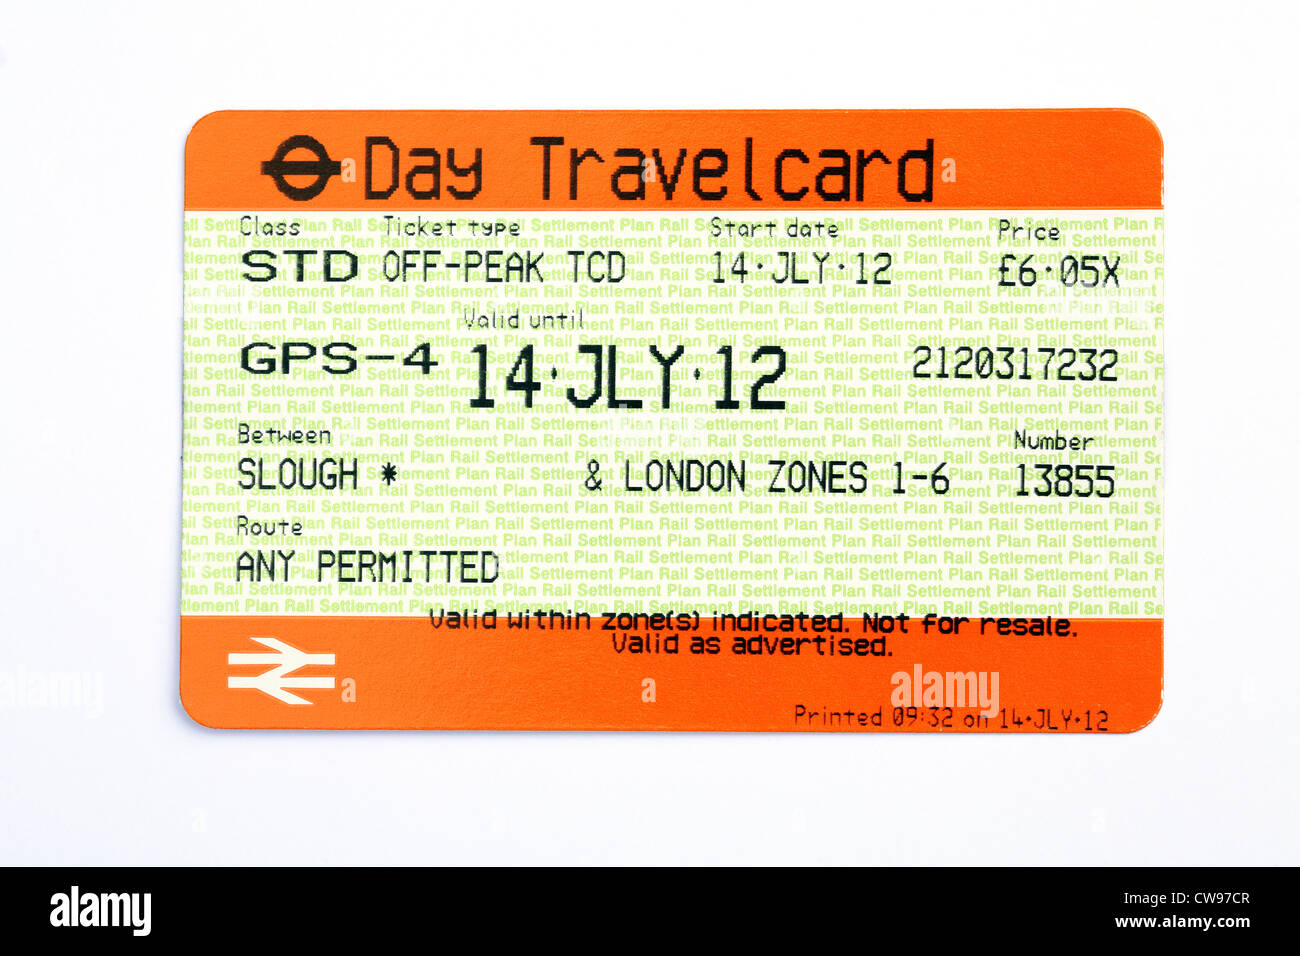 Group Travel Card 52